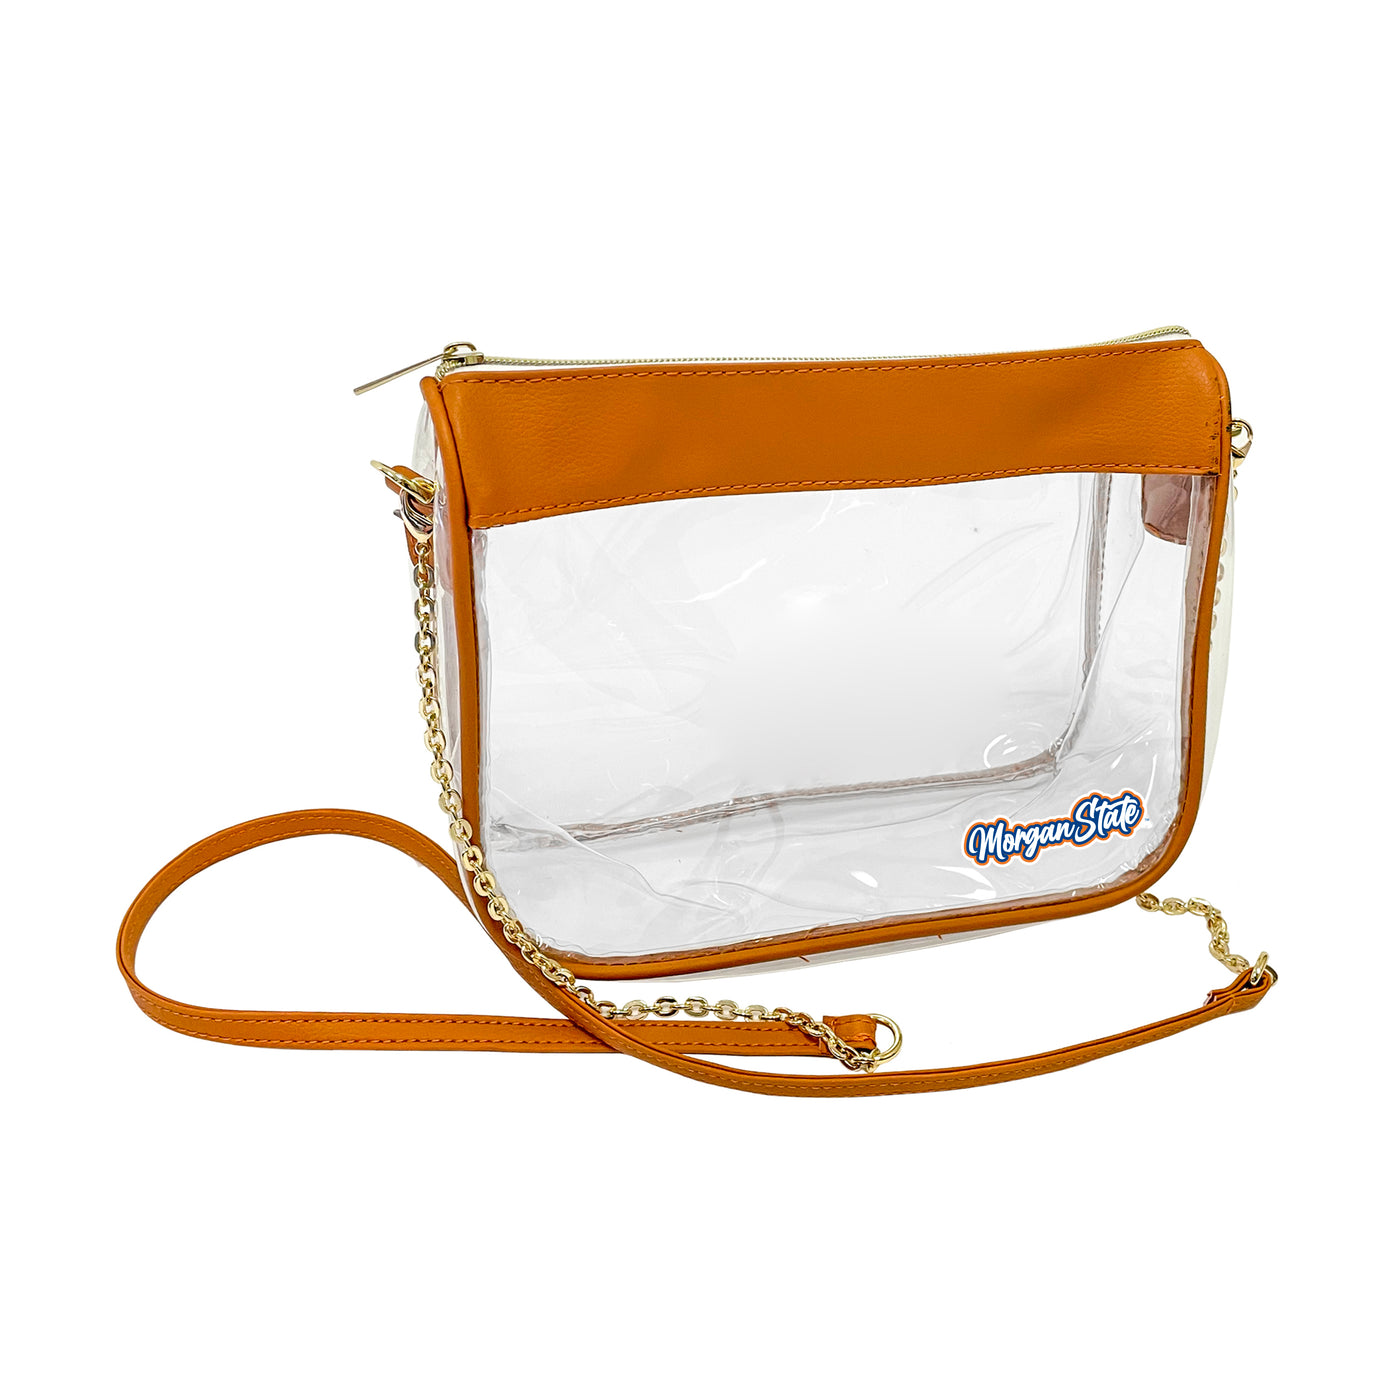 Morgan State Hype Clear Bag